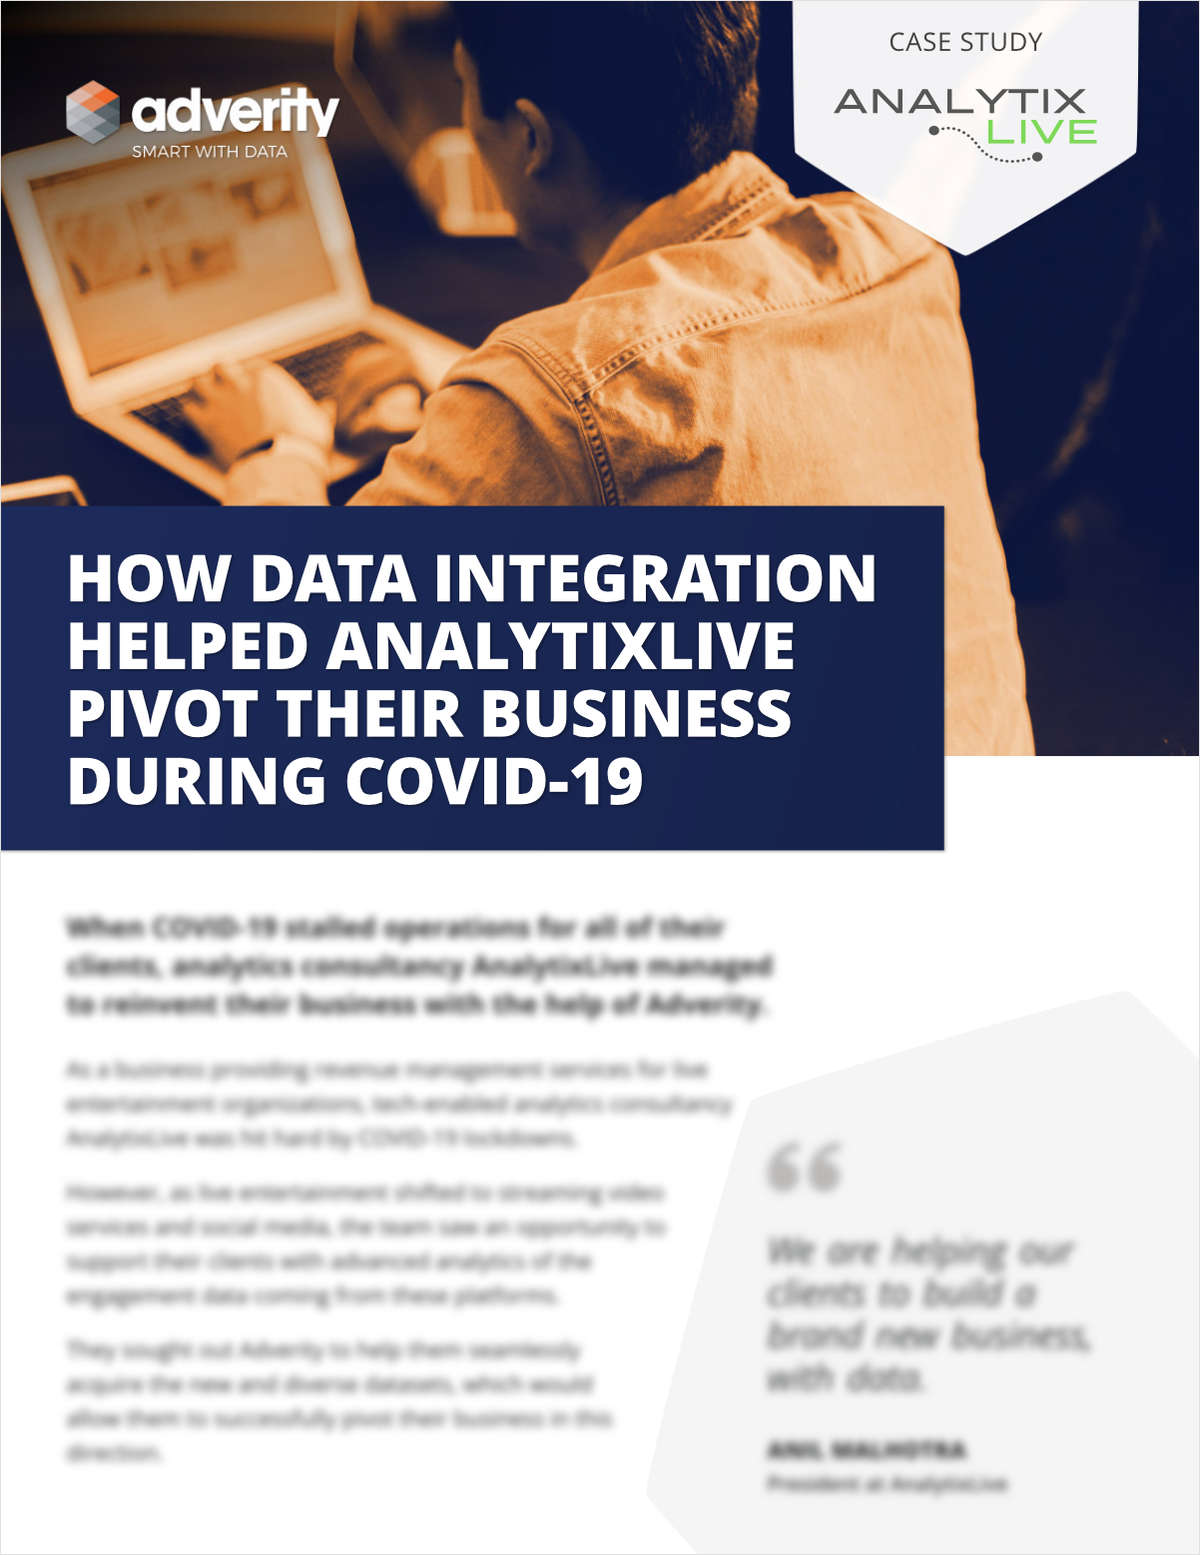 eGuide: How Data Integration Helped Analytix Live Pivot Their Business During Covid-19